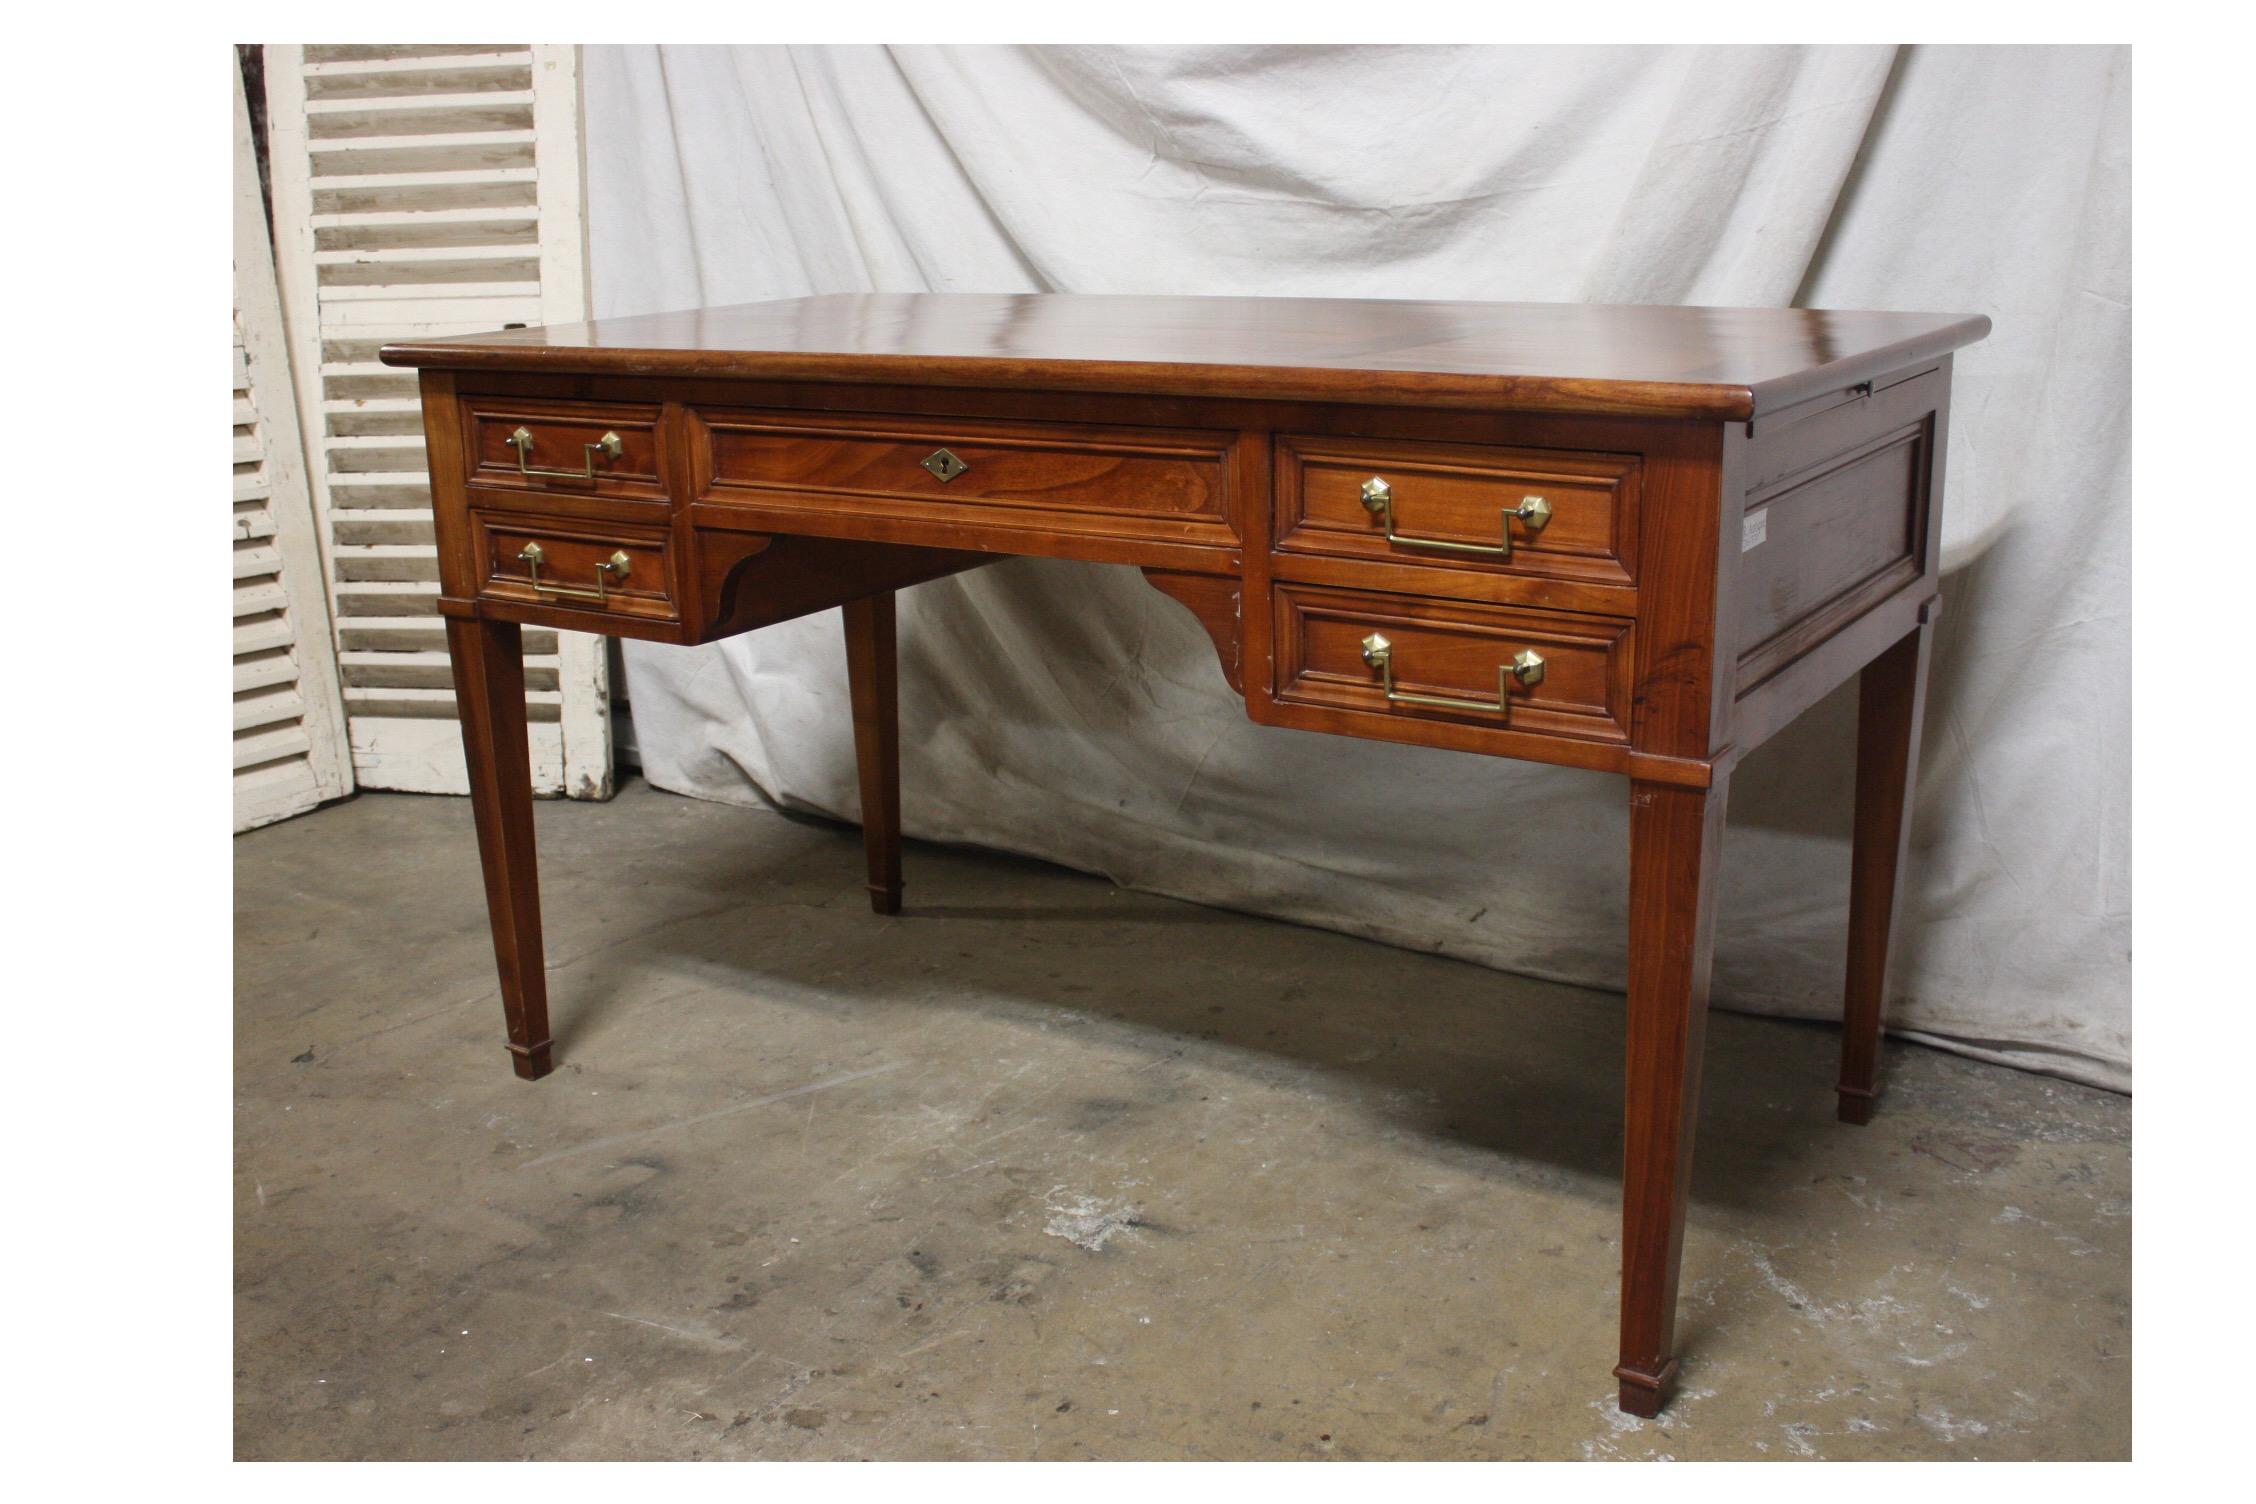 Mid-20th century French desk.